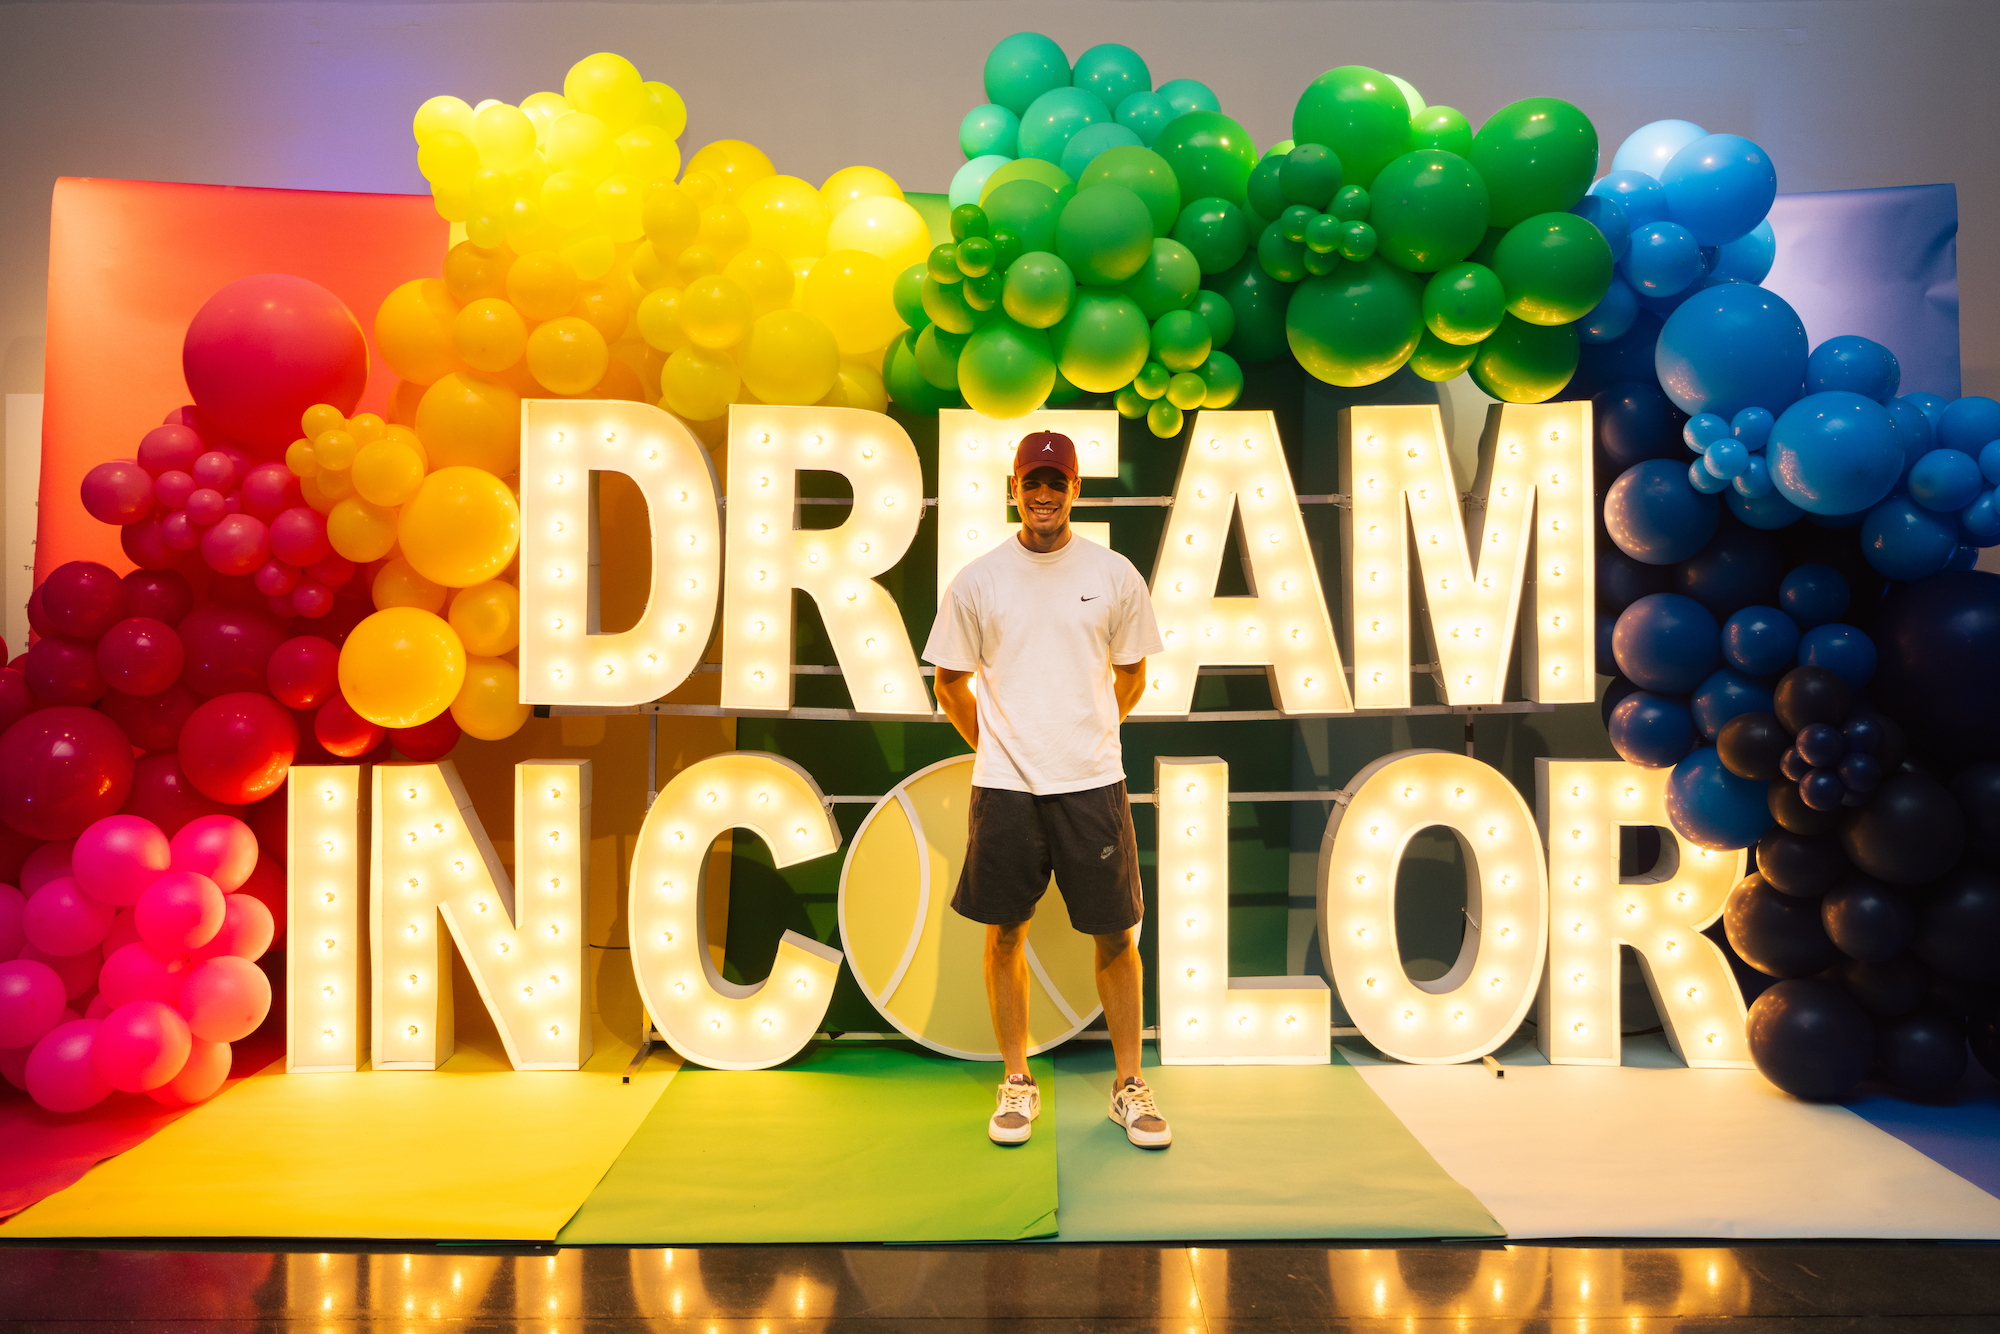 Player standing in front of a marquee letters spelling "Dream in Color".